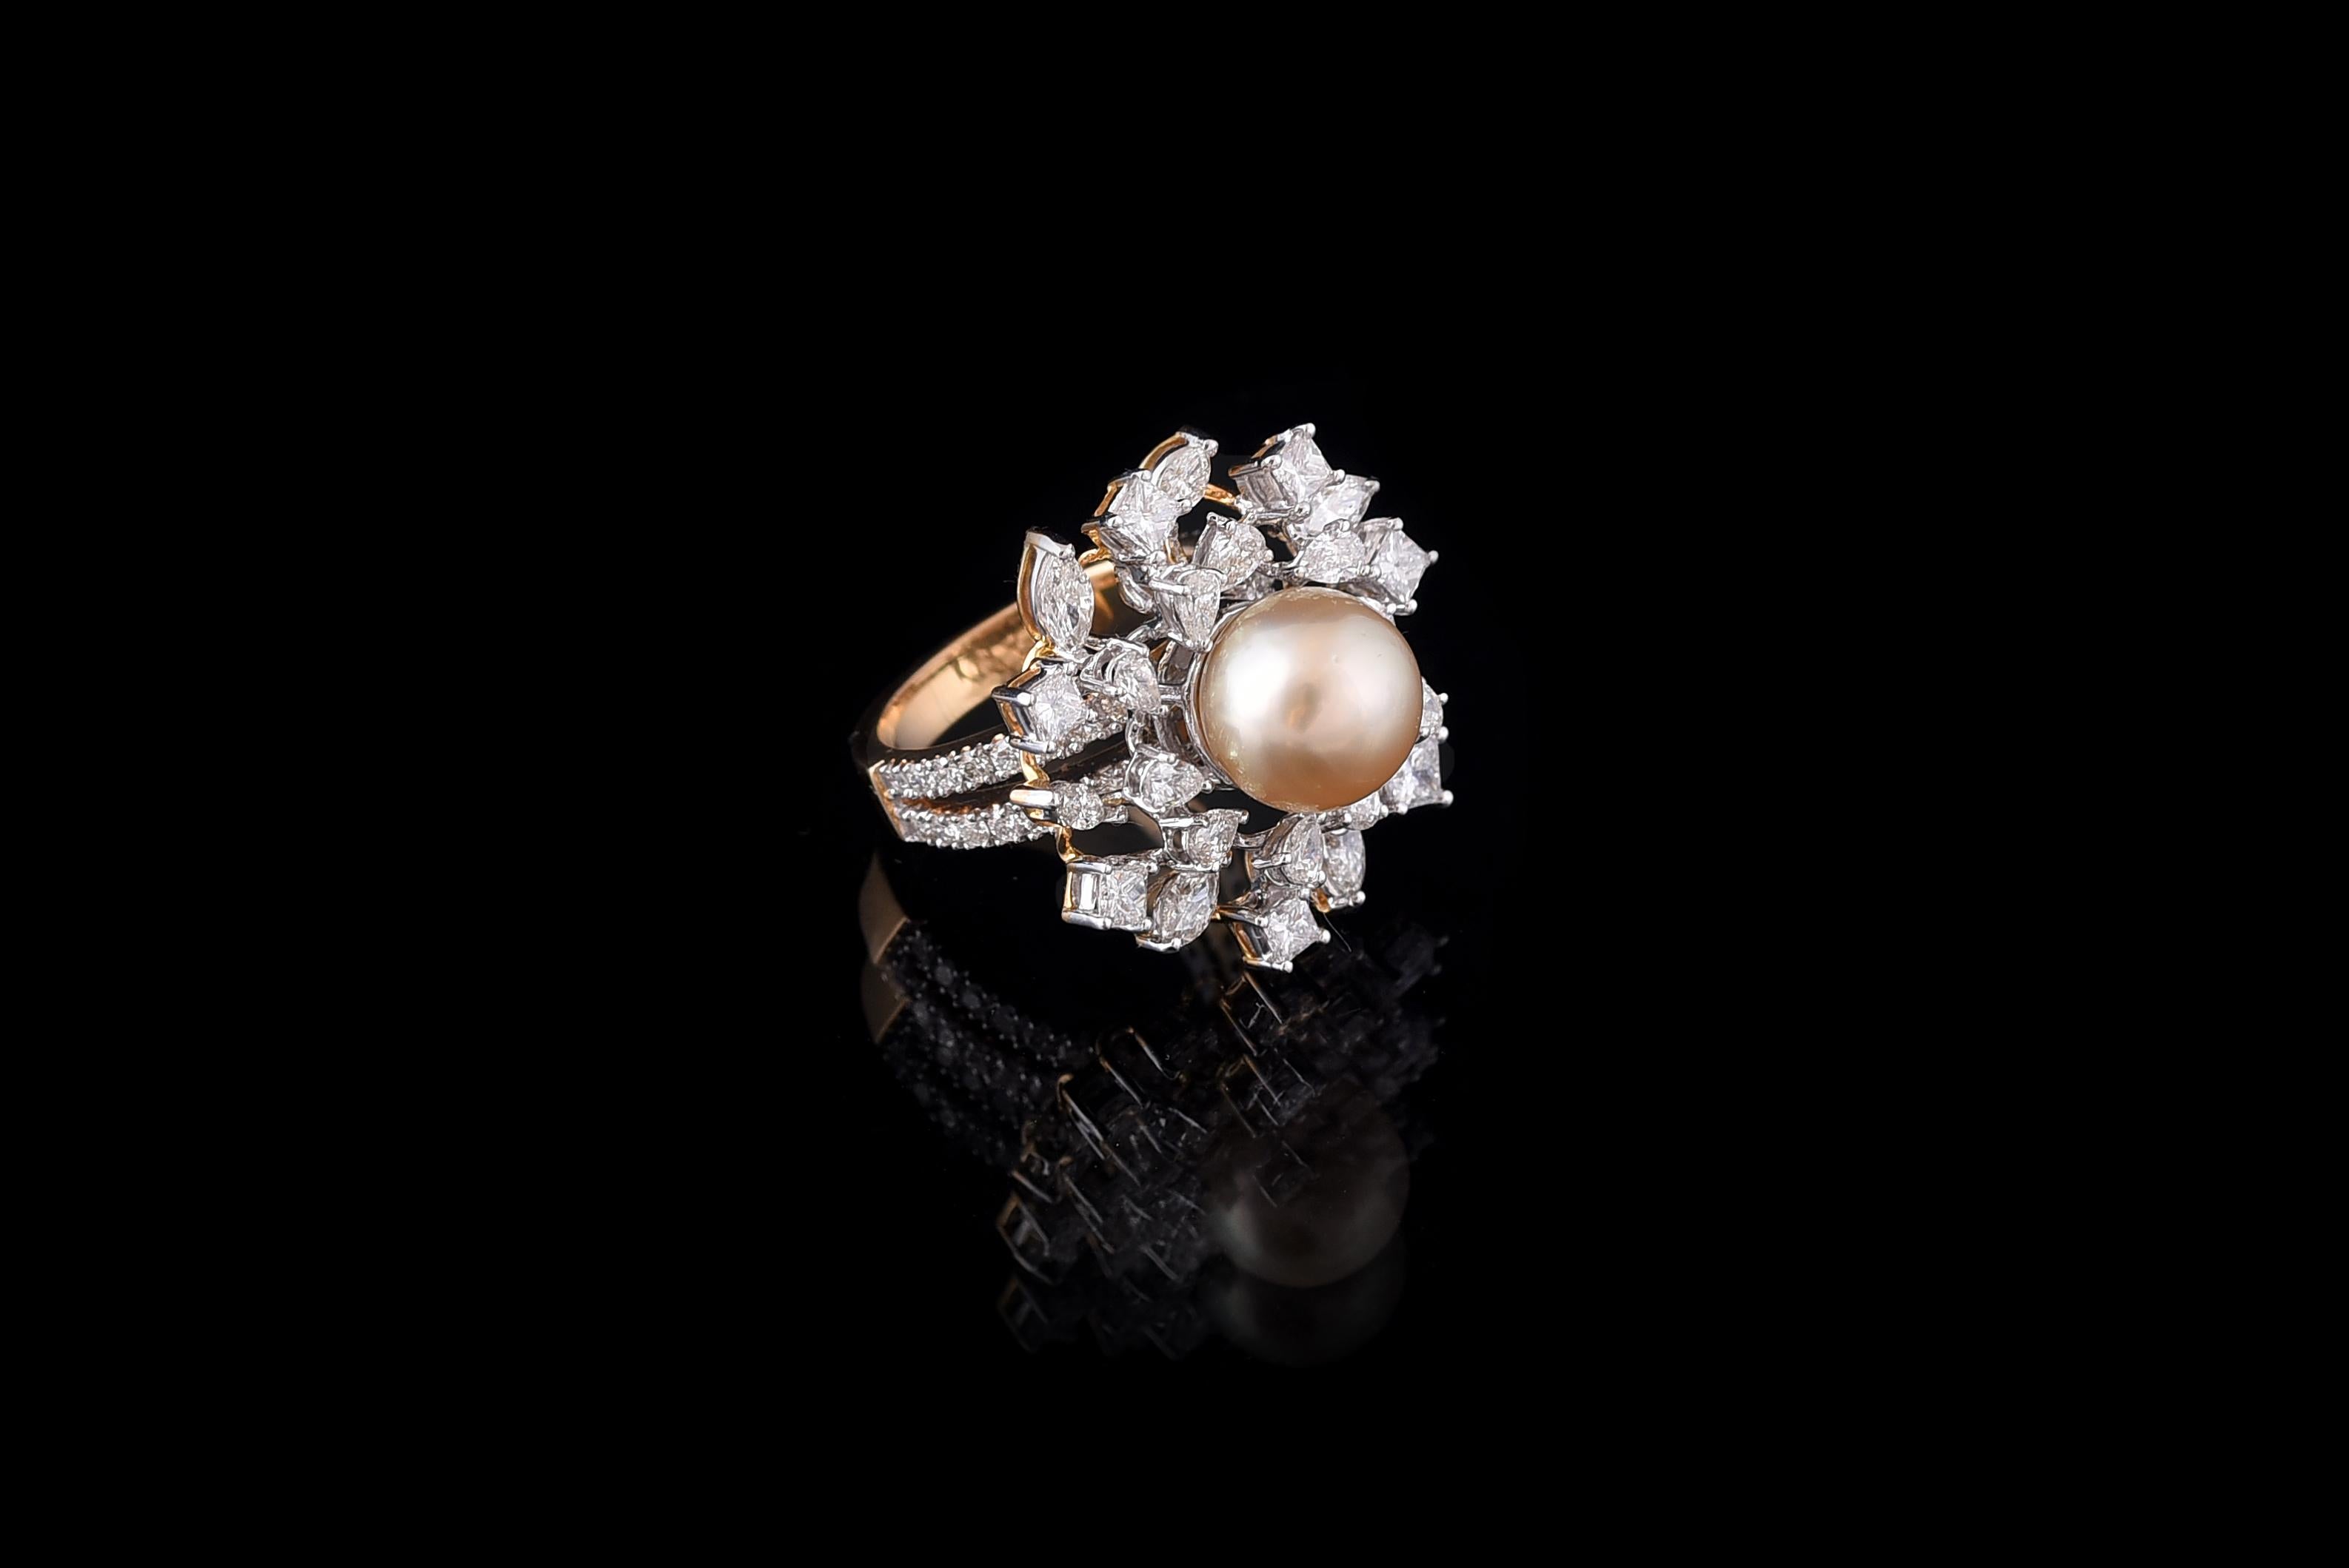 A classic Pearl and Diamond Cocktail Ring, set in 18K white and rose gold. The pearl is natural, fresh water, and weighs 6.74 carats. The weight of the diamonds is 2.94 carats. The ring is made in Indian ring size 12 (US size 6), and can be changed